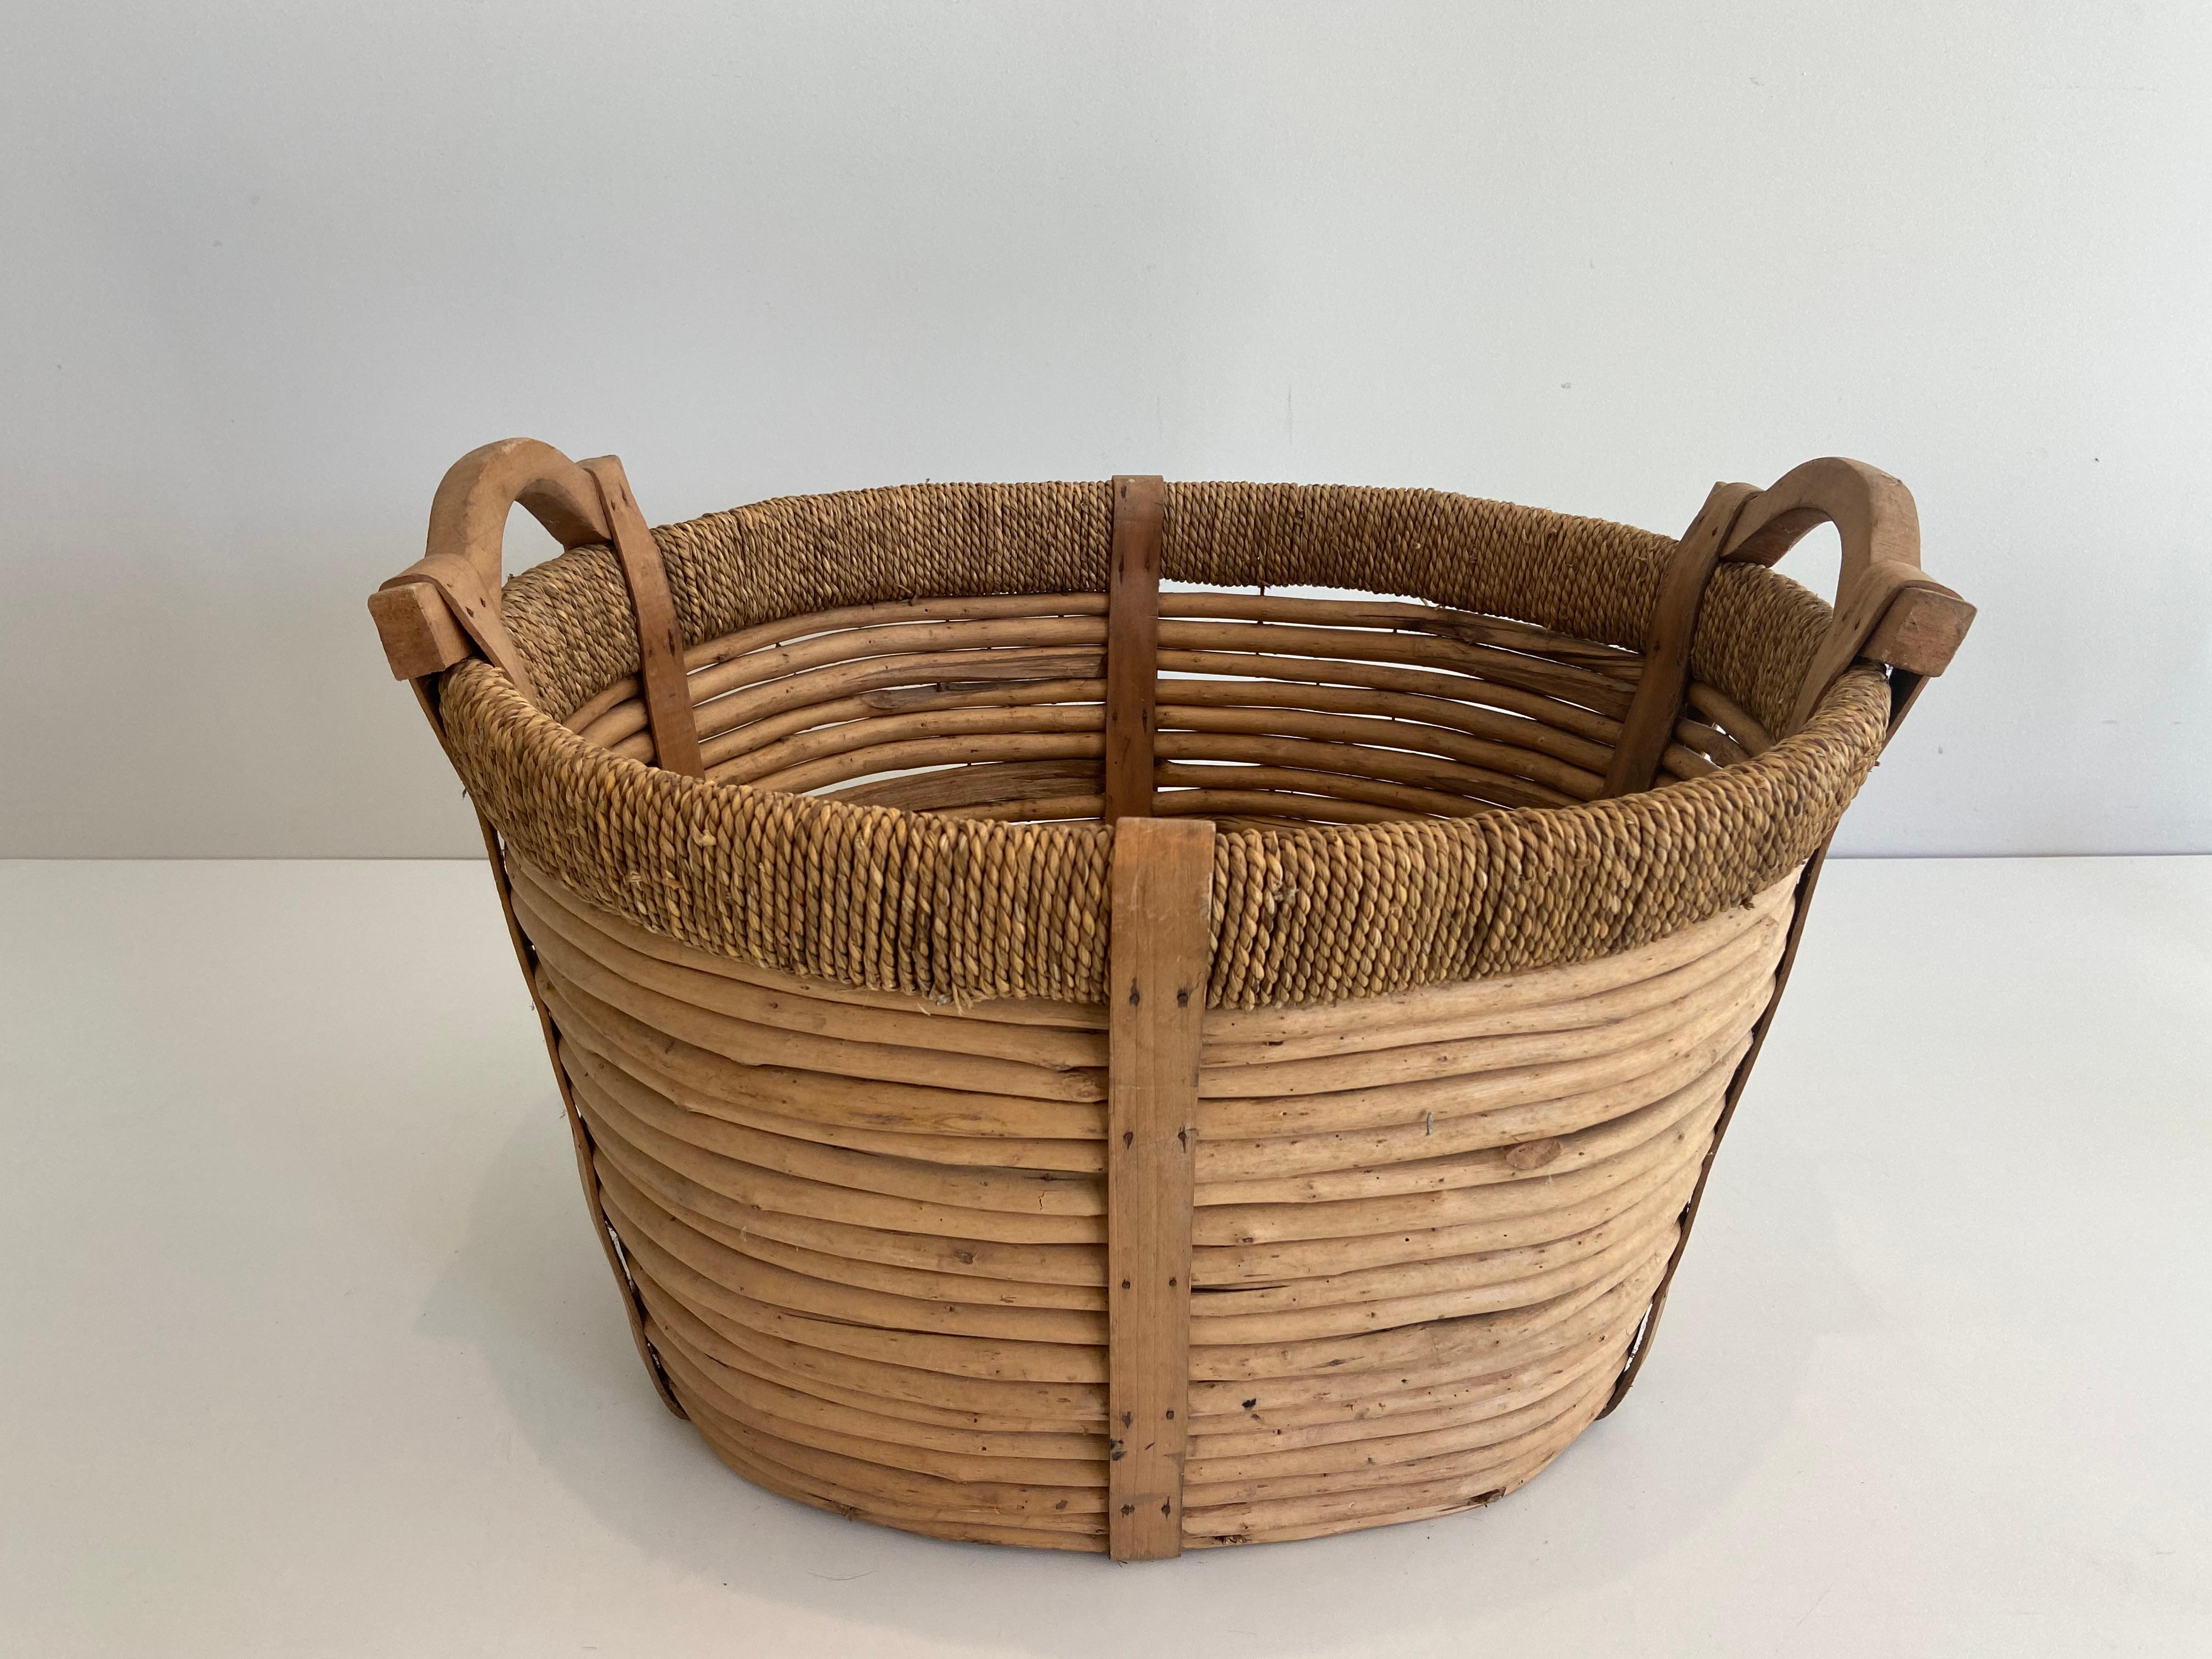 Mid-20th Century Rattan and Rope Logs Basket, French Work, Circa 1950